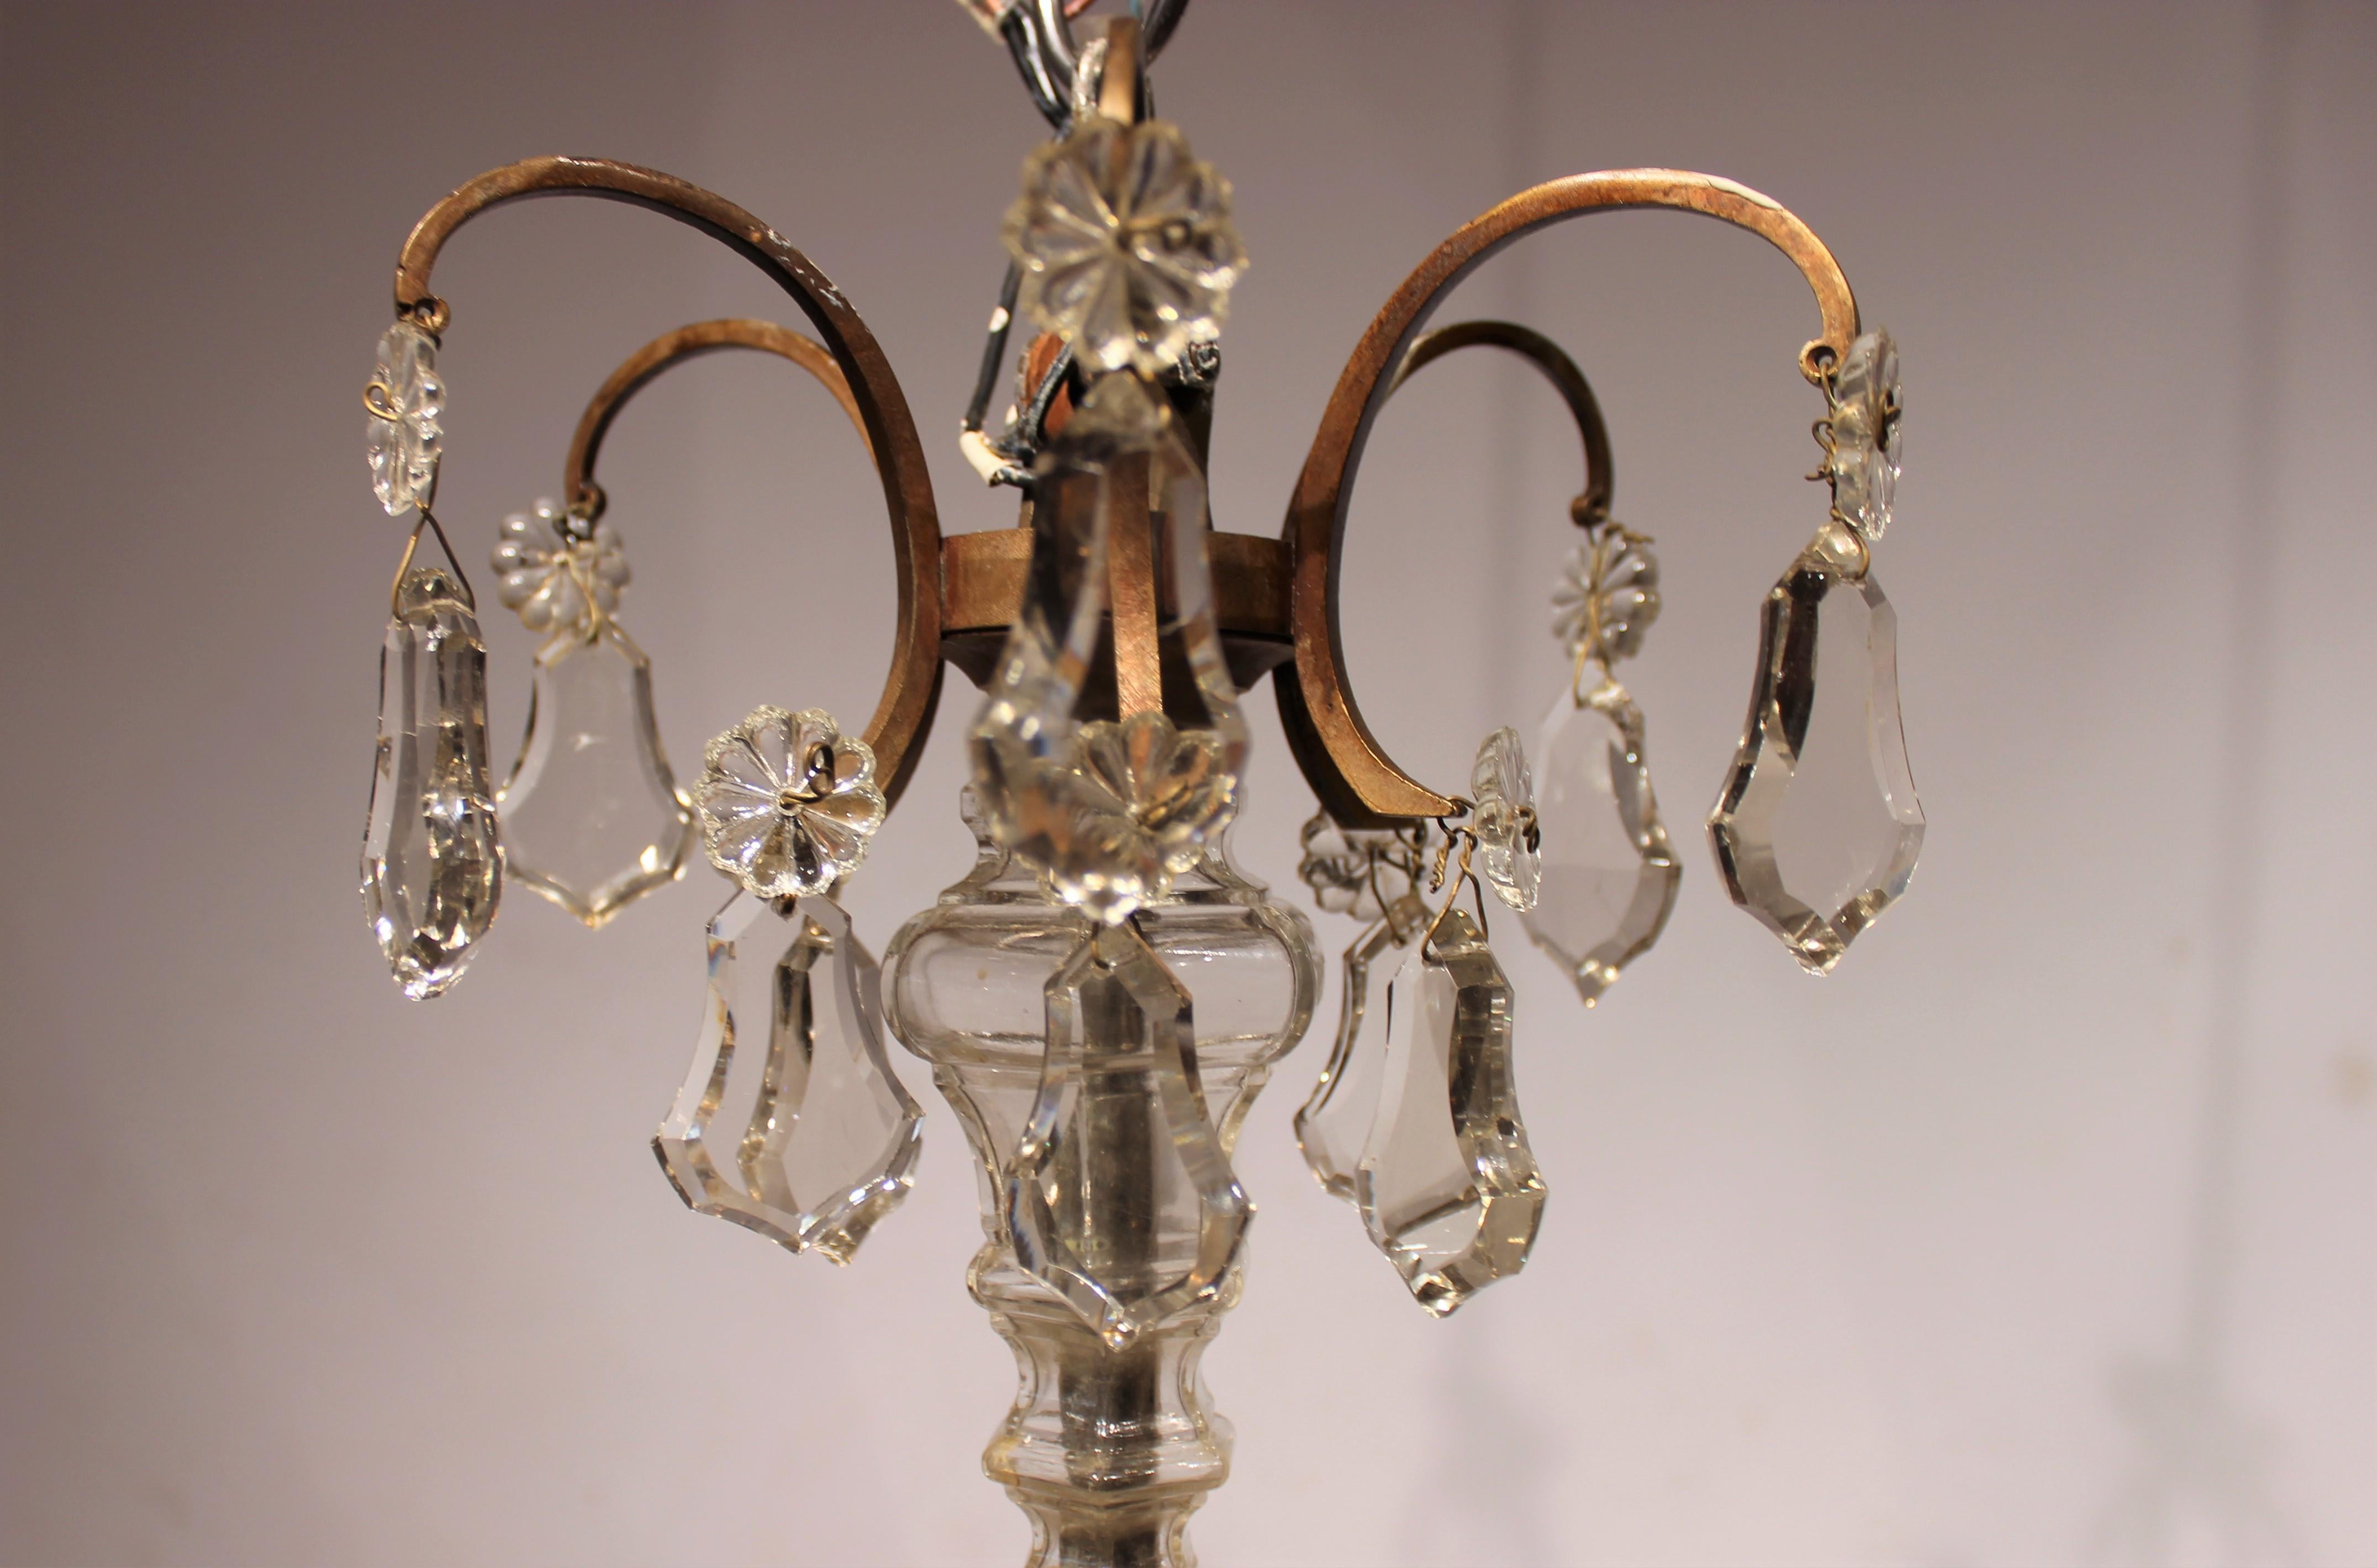 French chandelier with prisms from the 1940s, in great vintage condition.